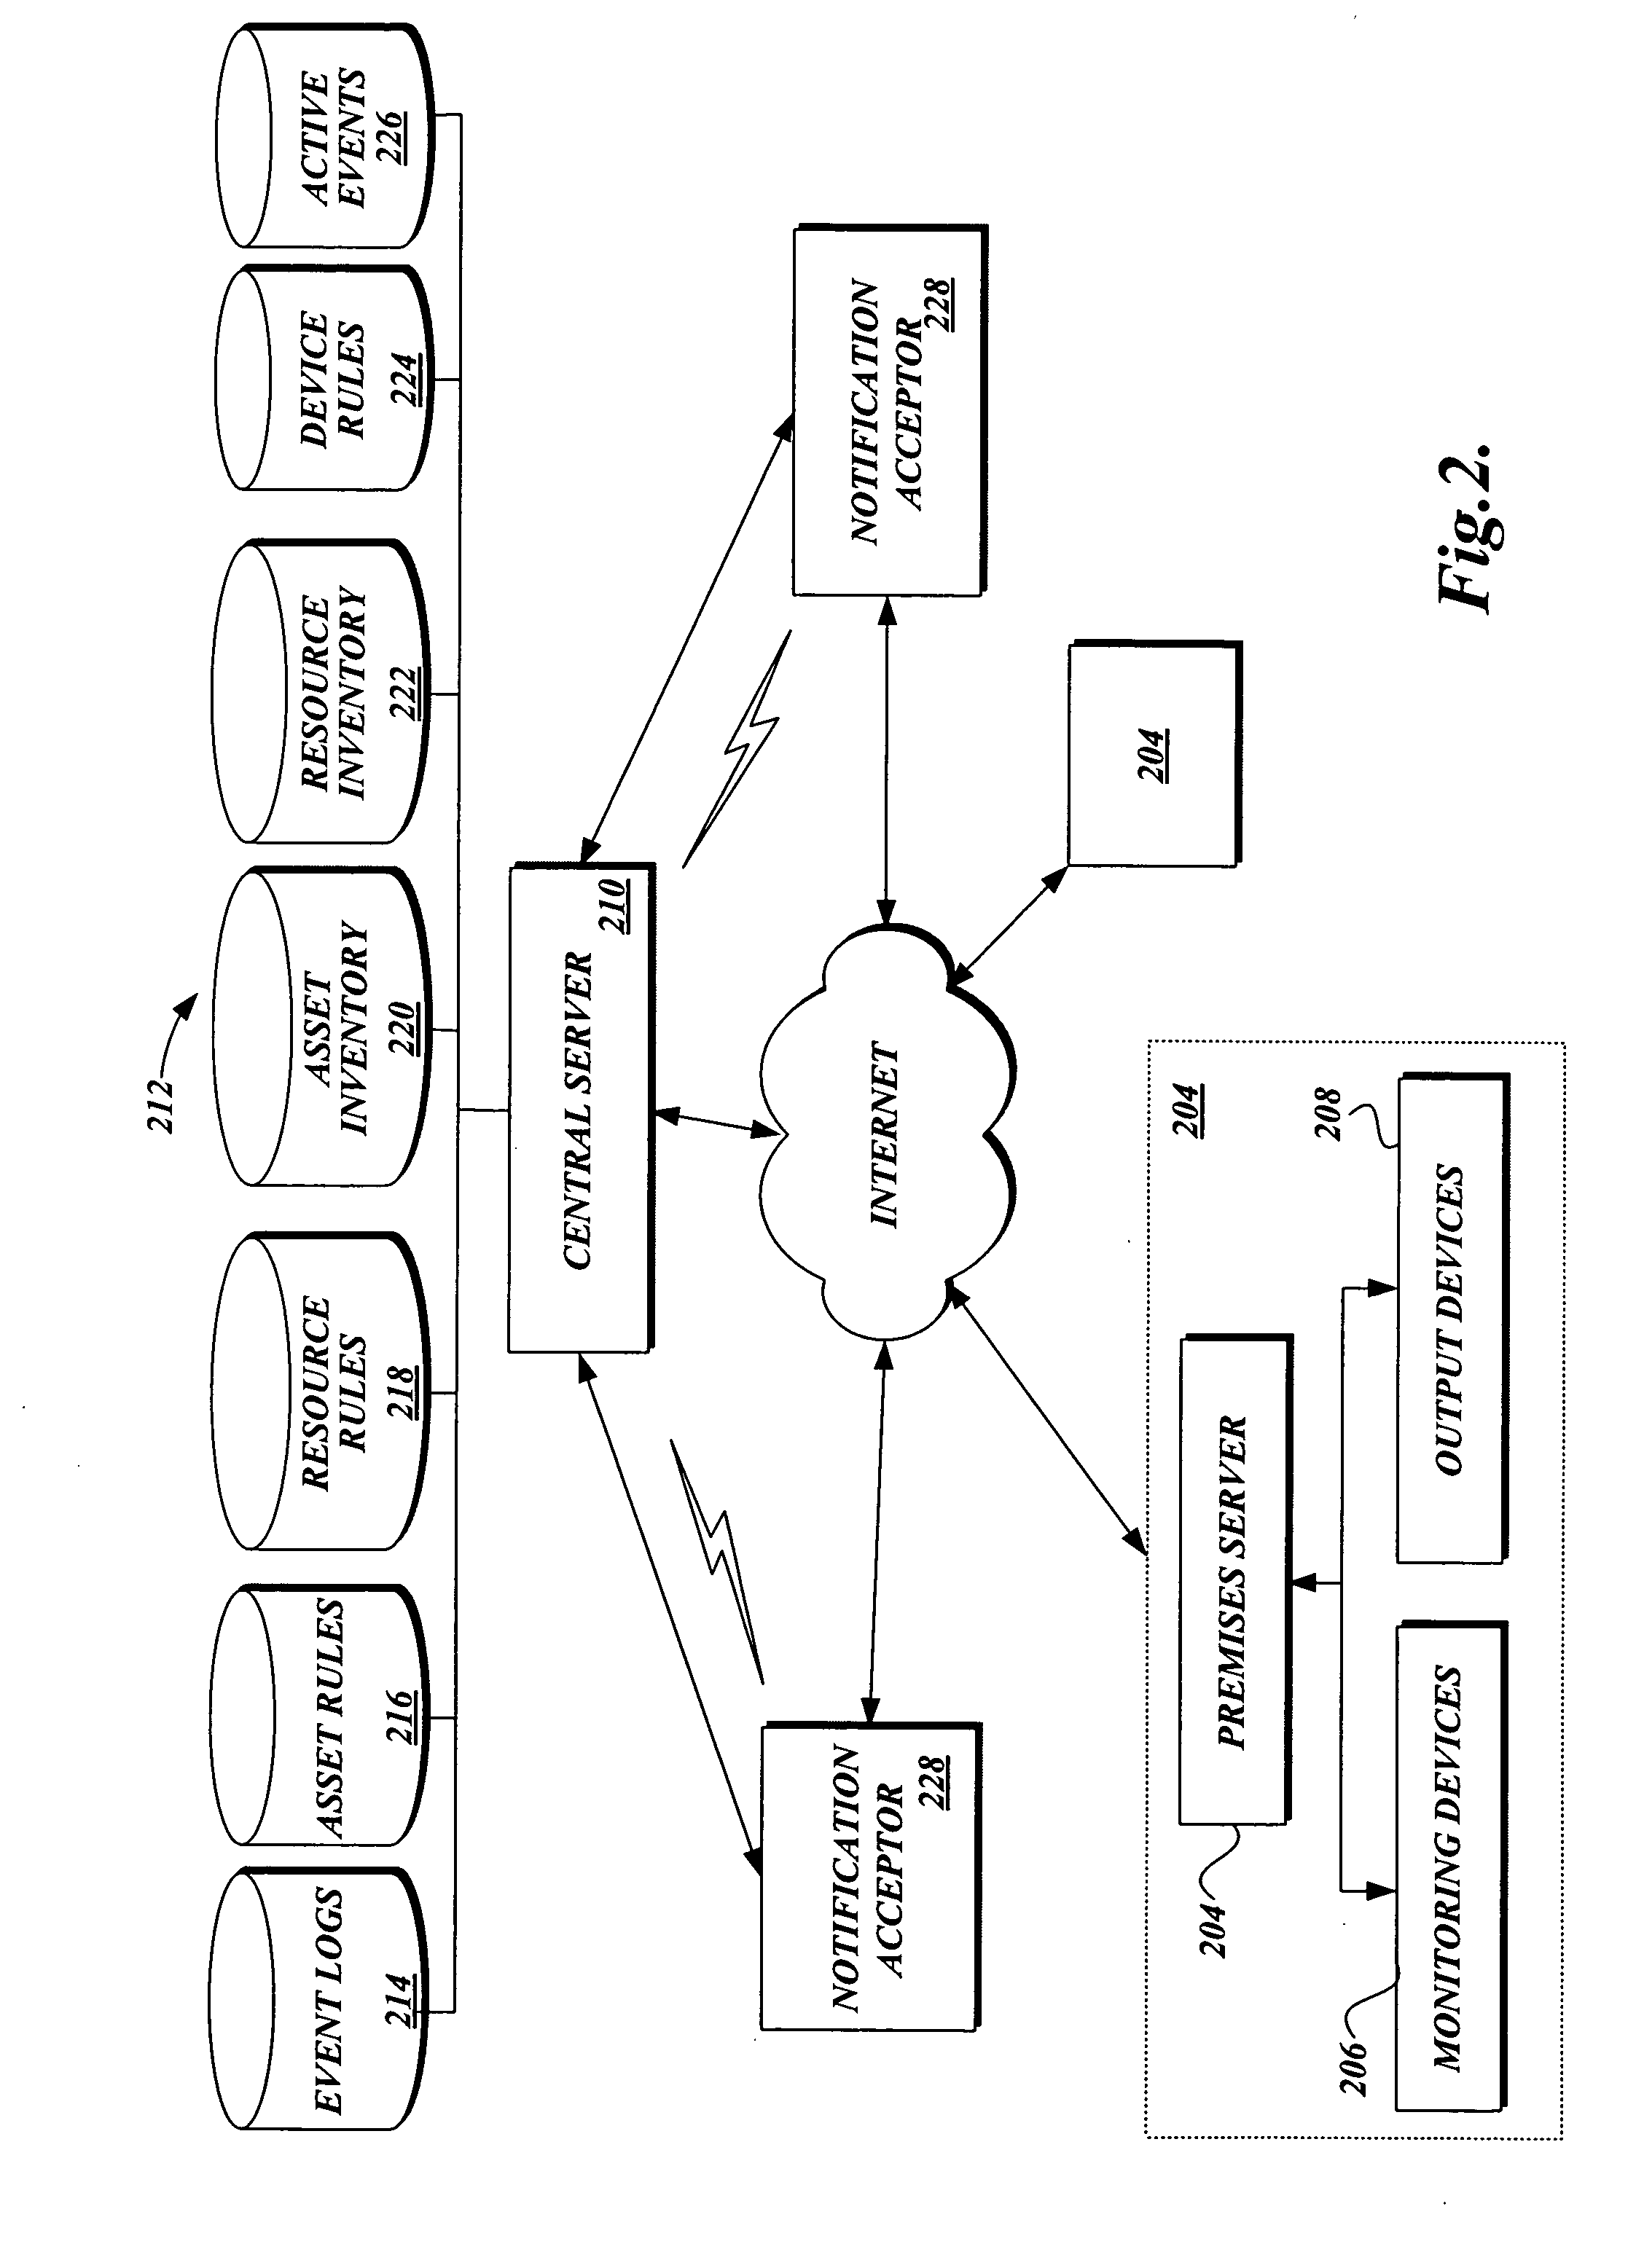 Method and process for configuring a premises for monitoring